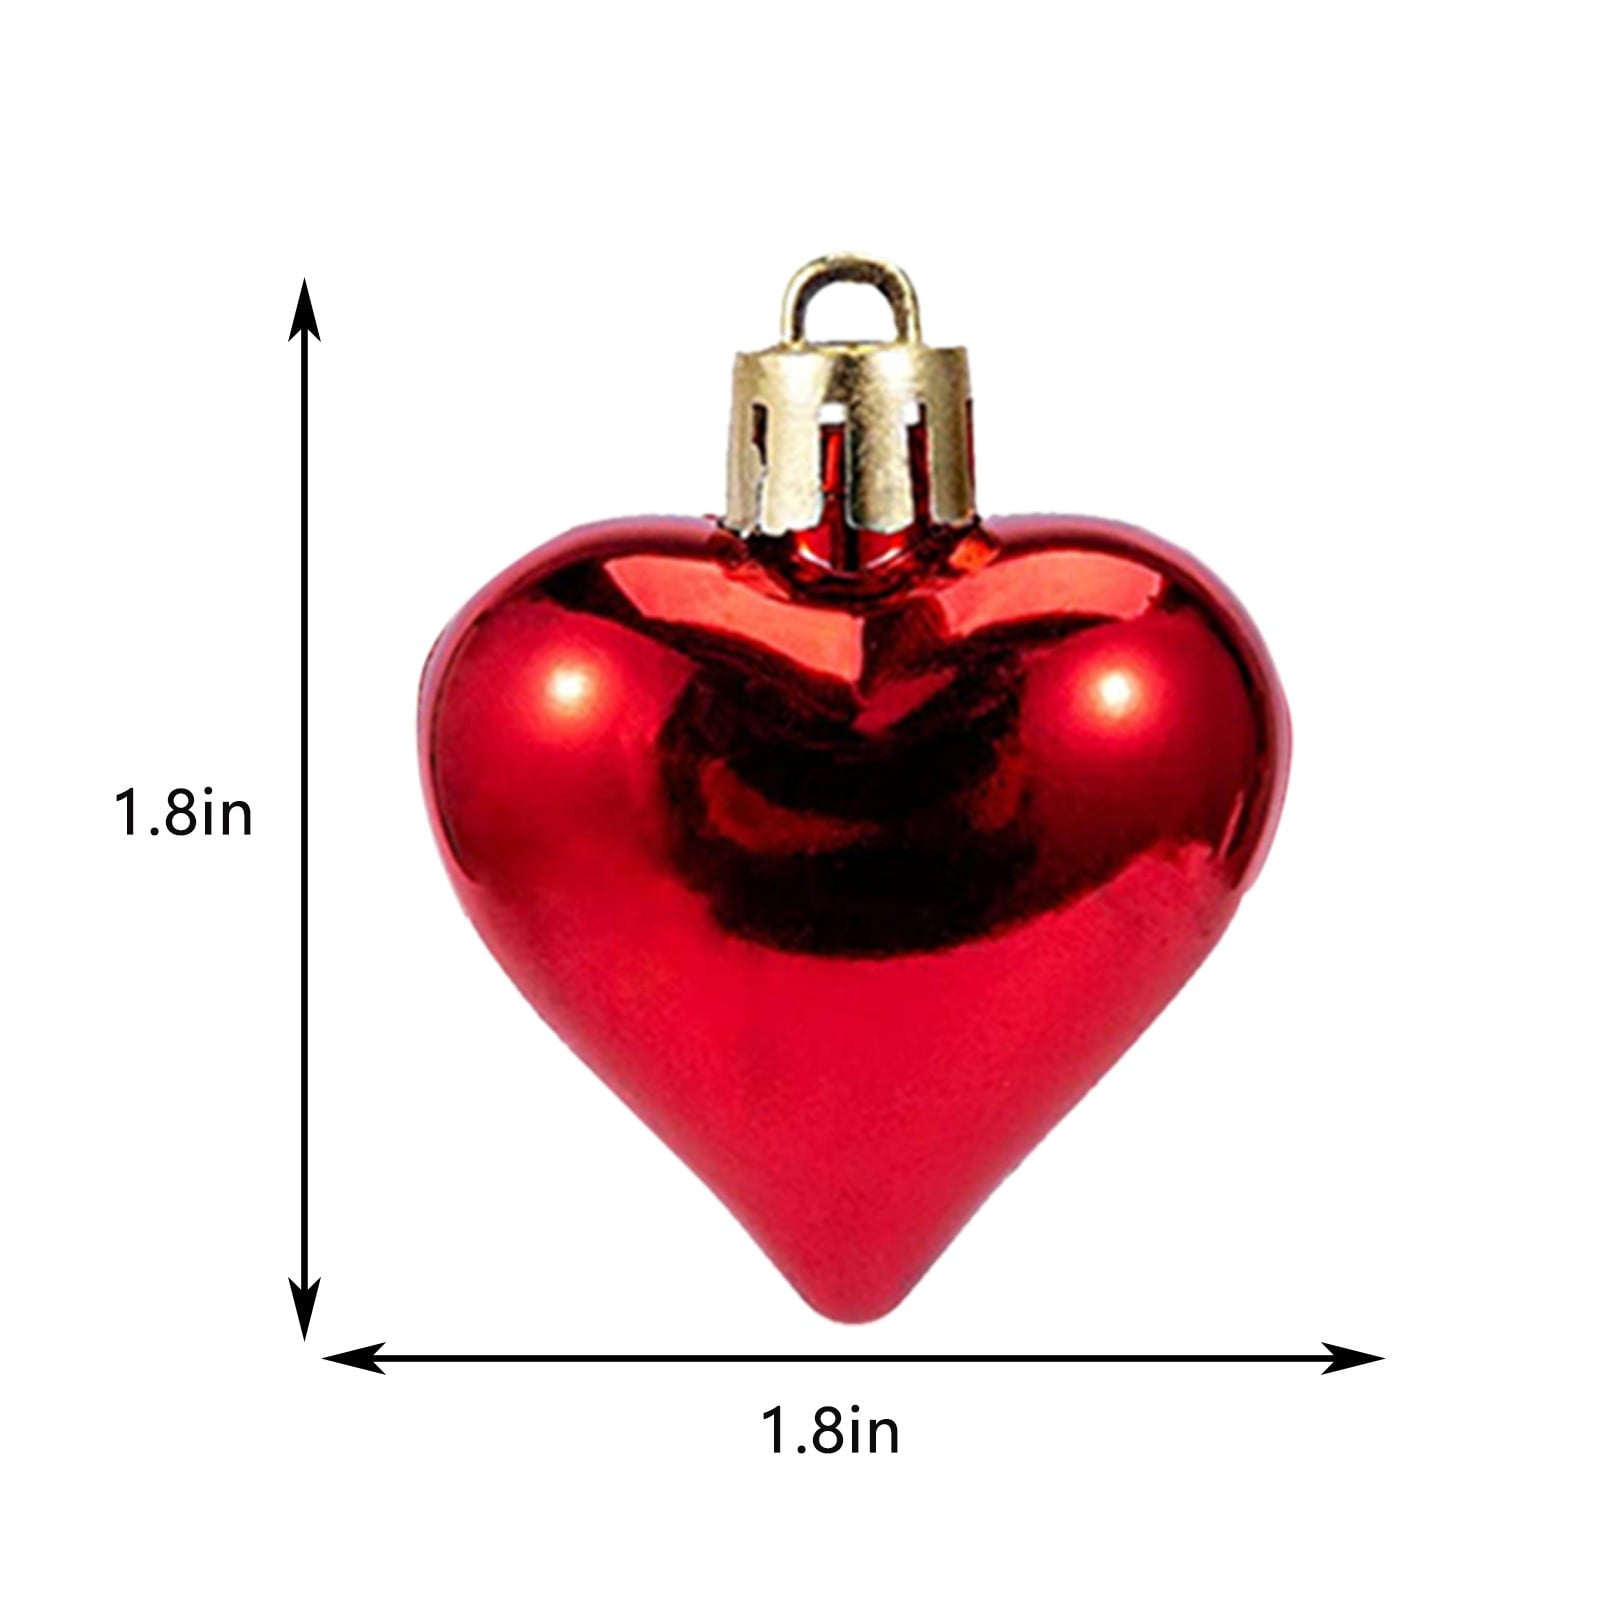 36 Pieces Heart Shaped Baubles Glitter Heart Shaped Ornaments for  Valentine's Day Holidays Decoration, 3 Colors